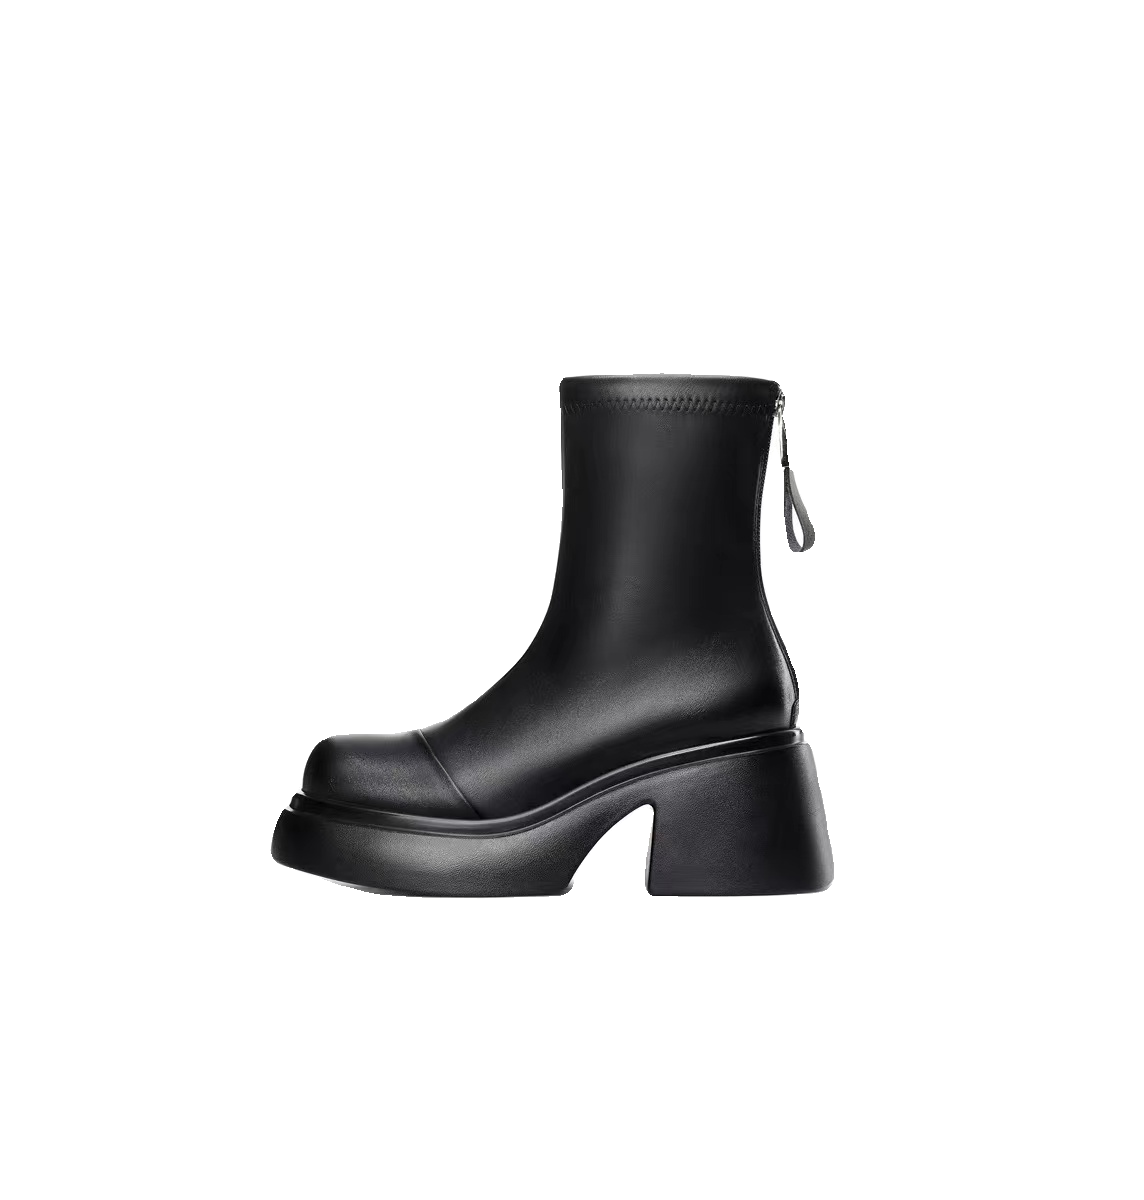 (Place an order) Fashion boots, short boots, women's boots